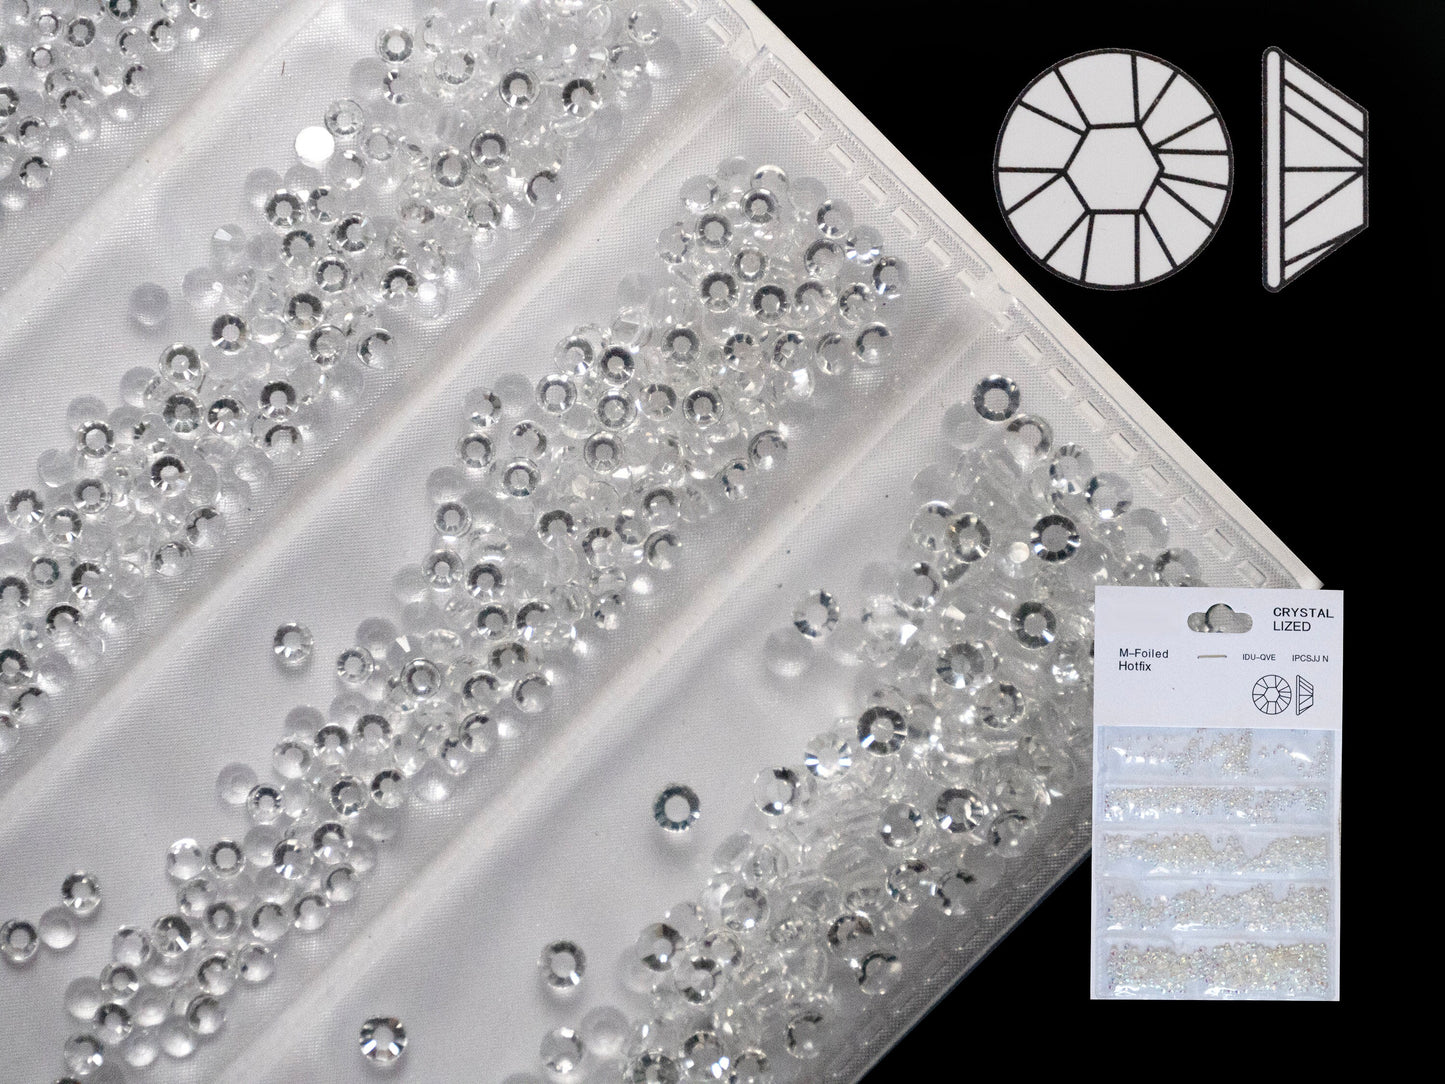 1440ct Non-hotfix CLear Flatback Rhinestones/ Glass Nail Rhinestone For Nails Art Decals / #3-#8 Small size Studs Resin Crafts supply